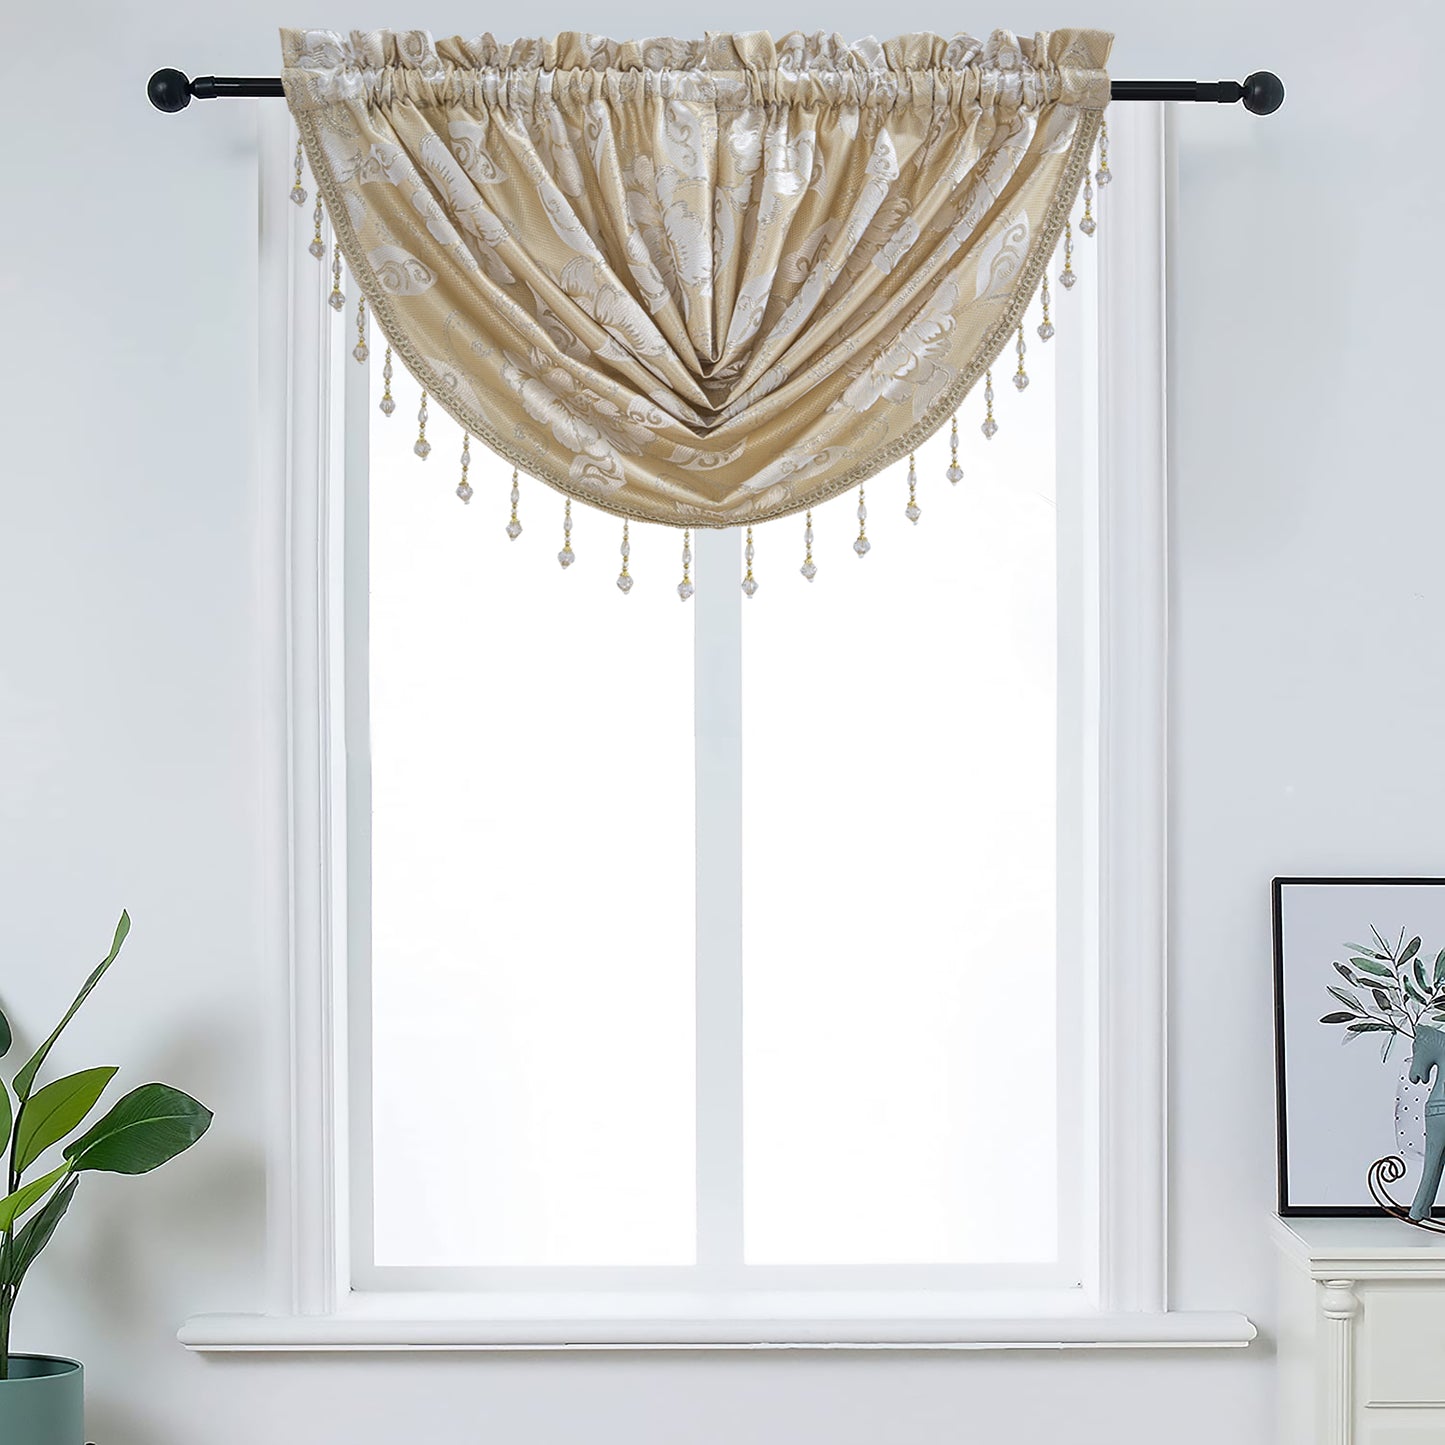 Cassie - Embroidered Macrame Jacquard Panel - Valance sold separately - Glory Home Design